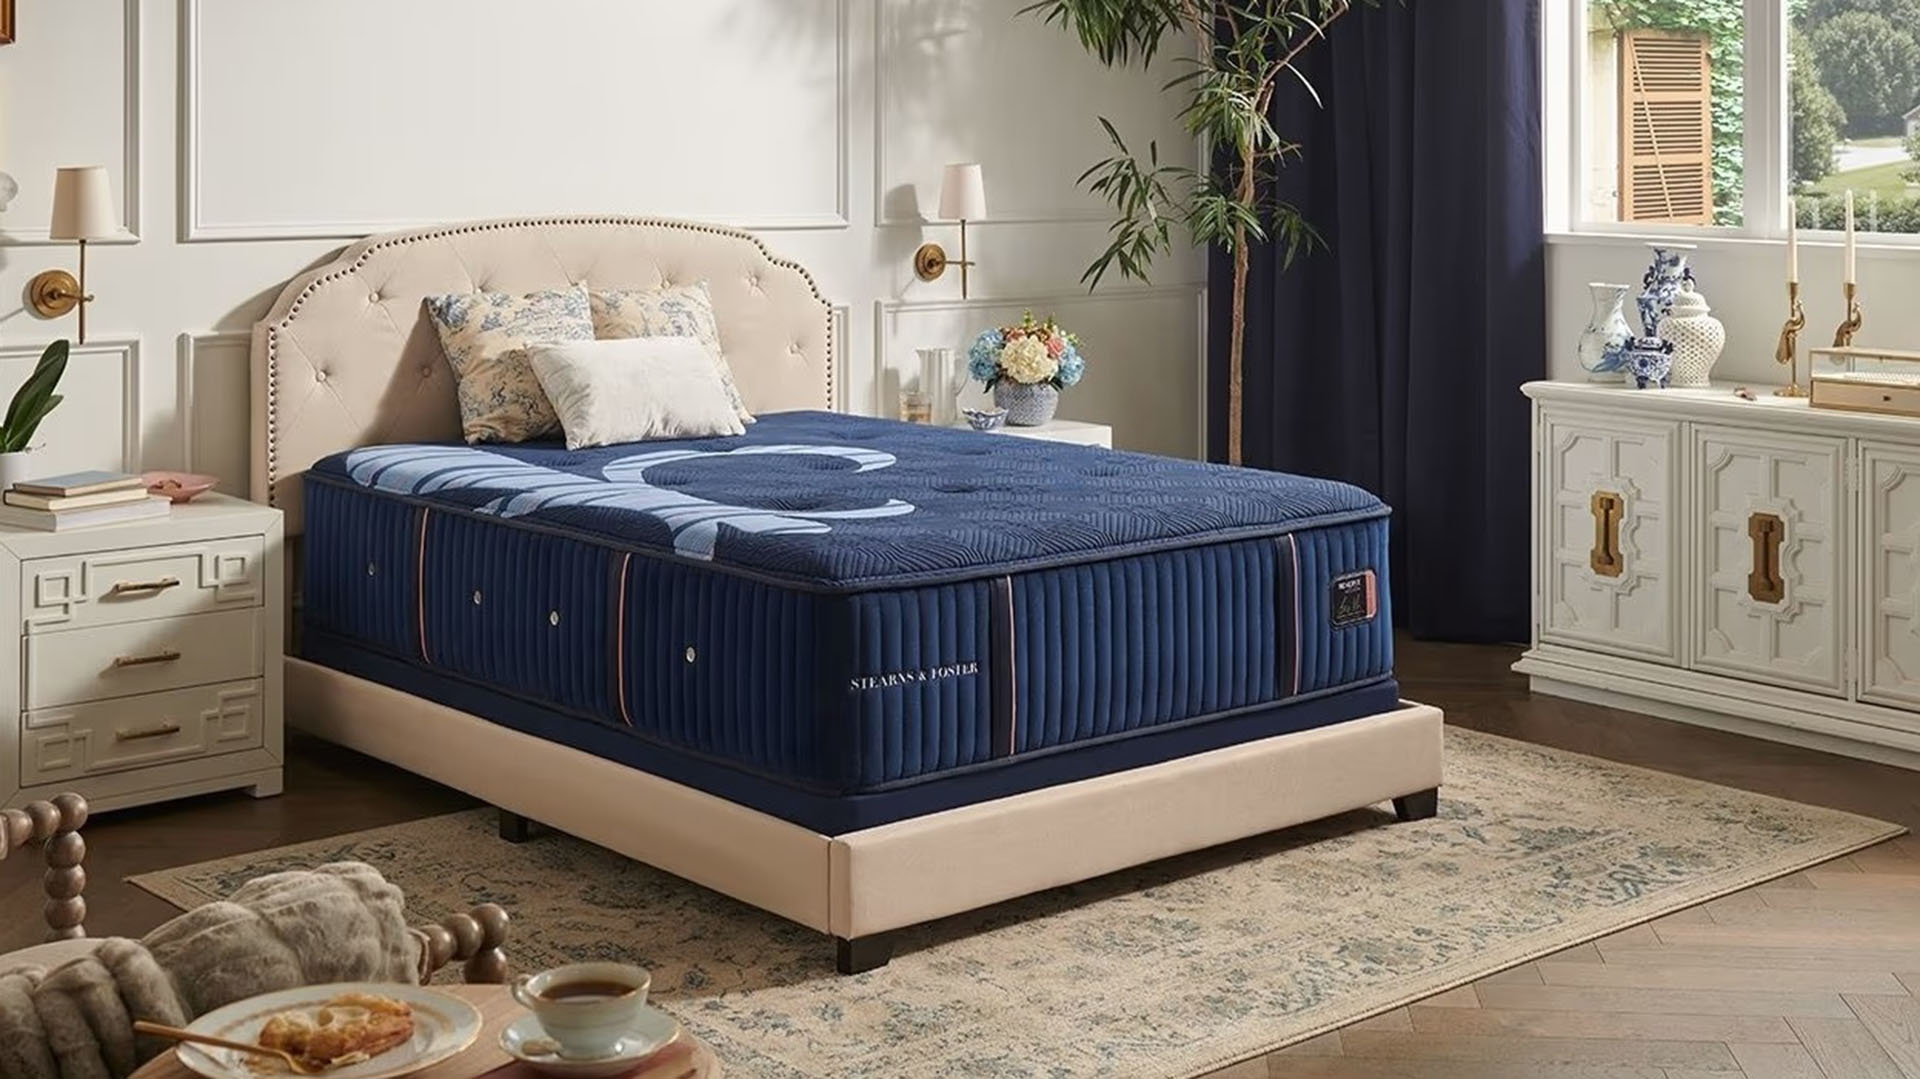 Stearns & Foster mattresses in Bayonne are designed with comfort and support in mind.